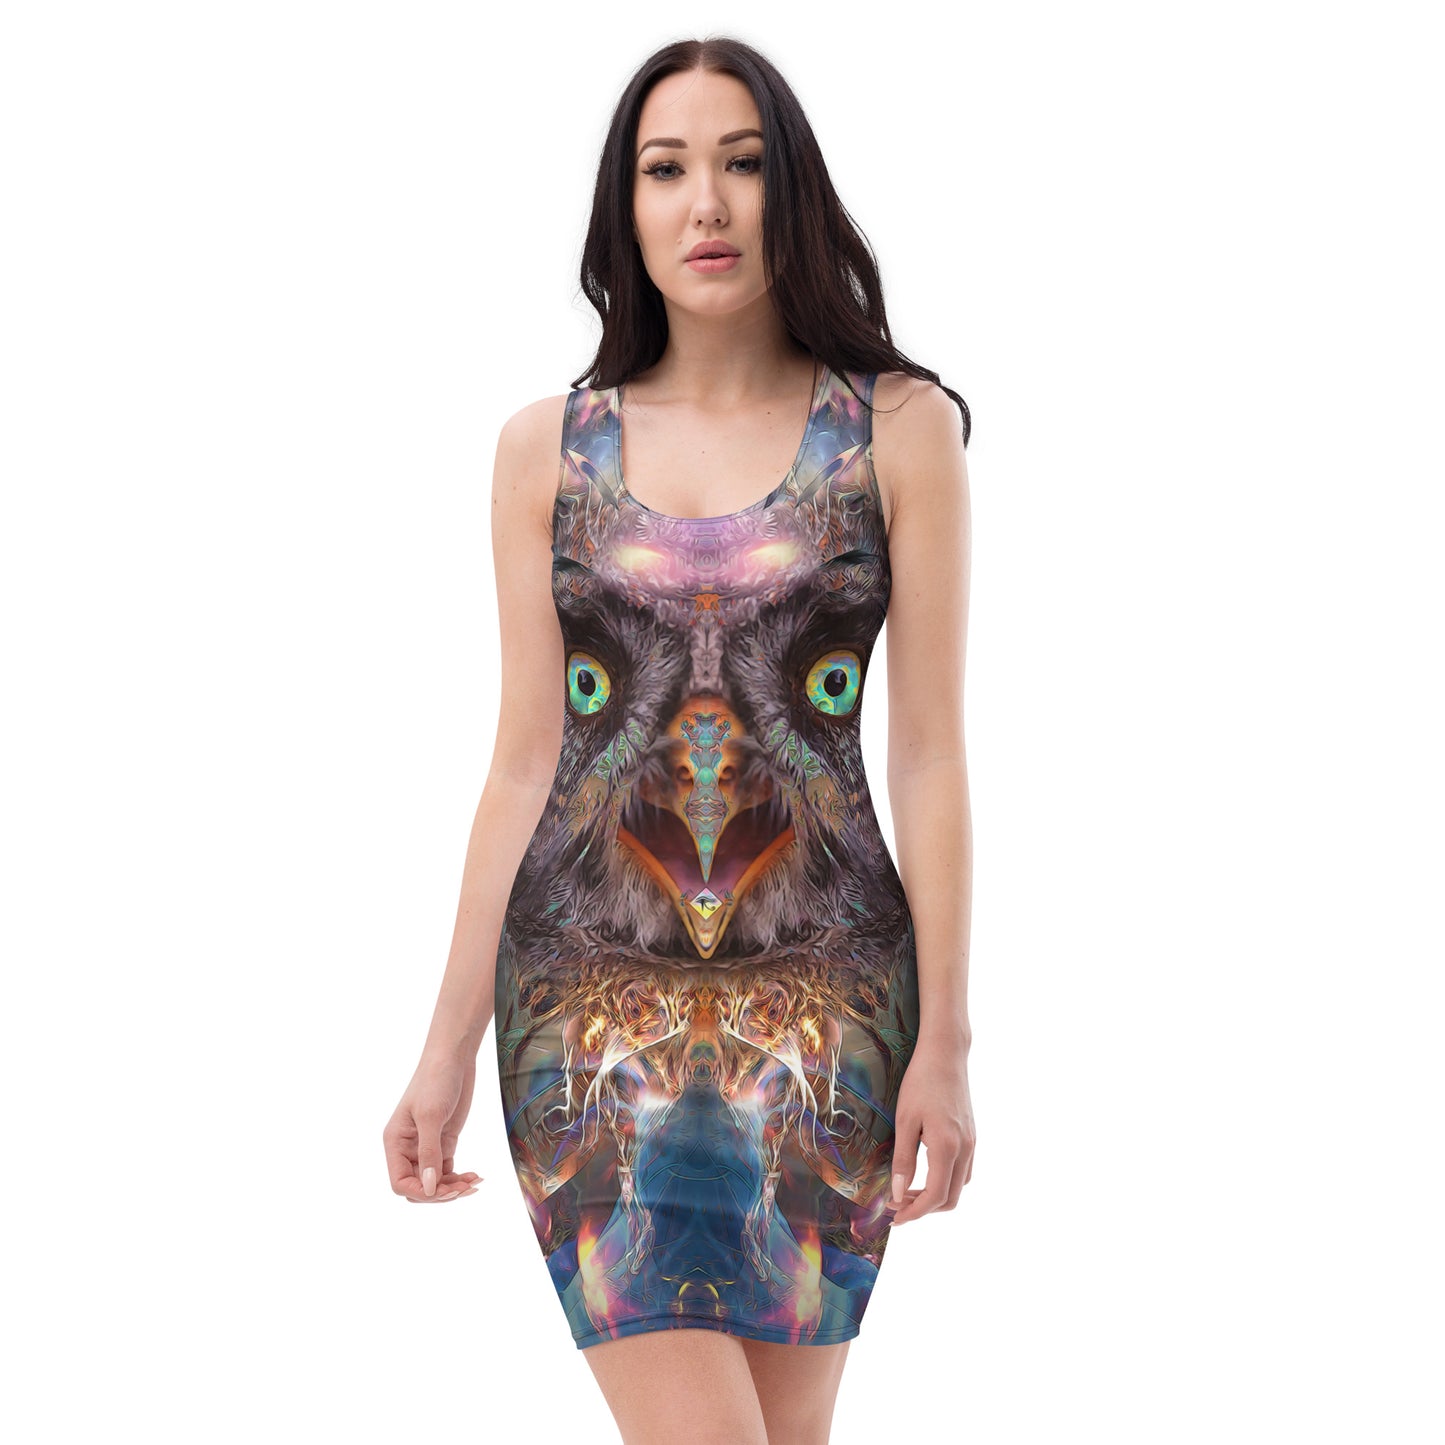 "Complete Awareness" Bodycon FITTED DRESS